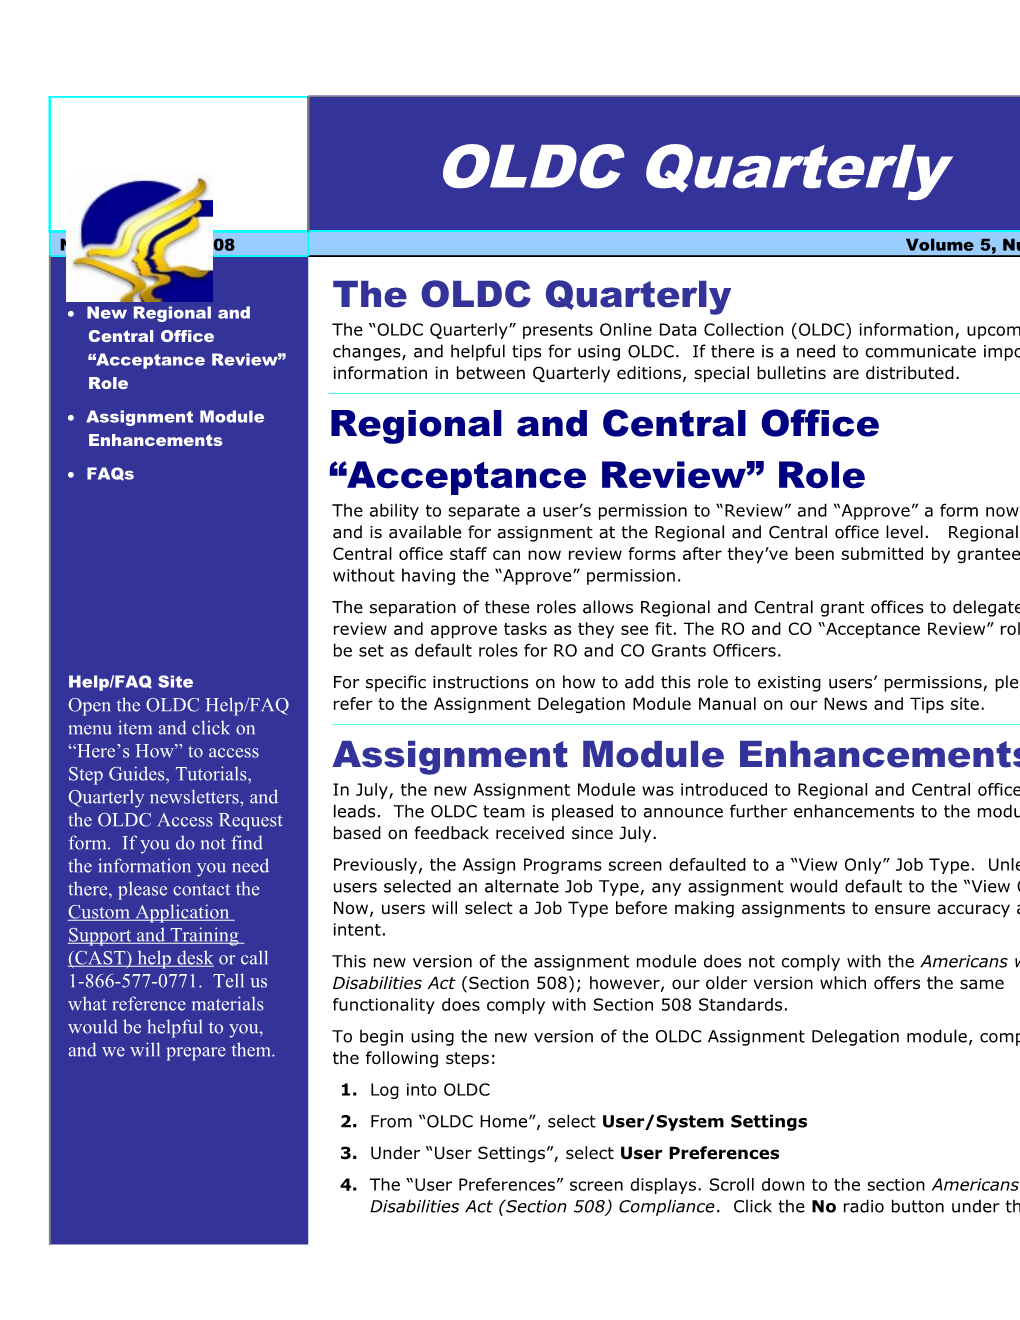 New Regional and Central Office Acceptance Review Role